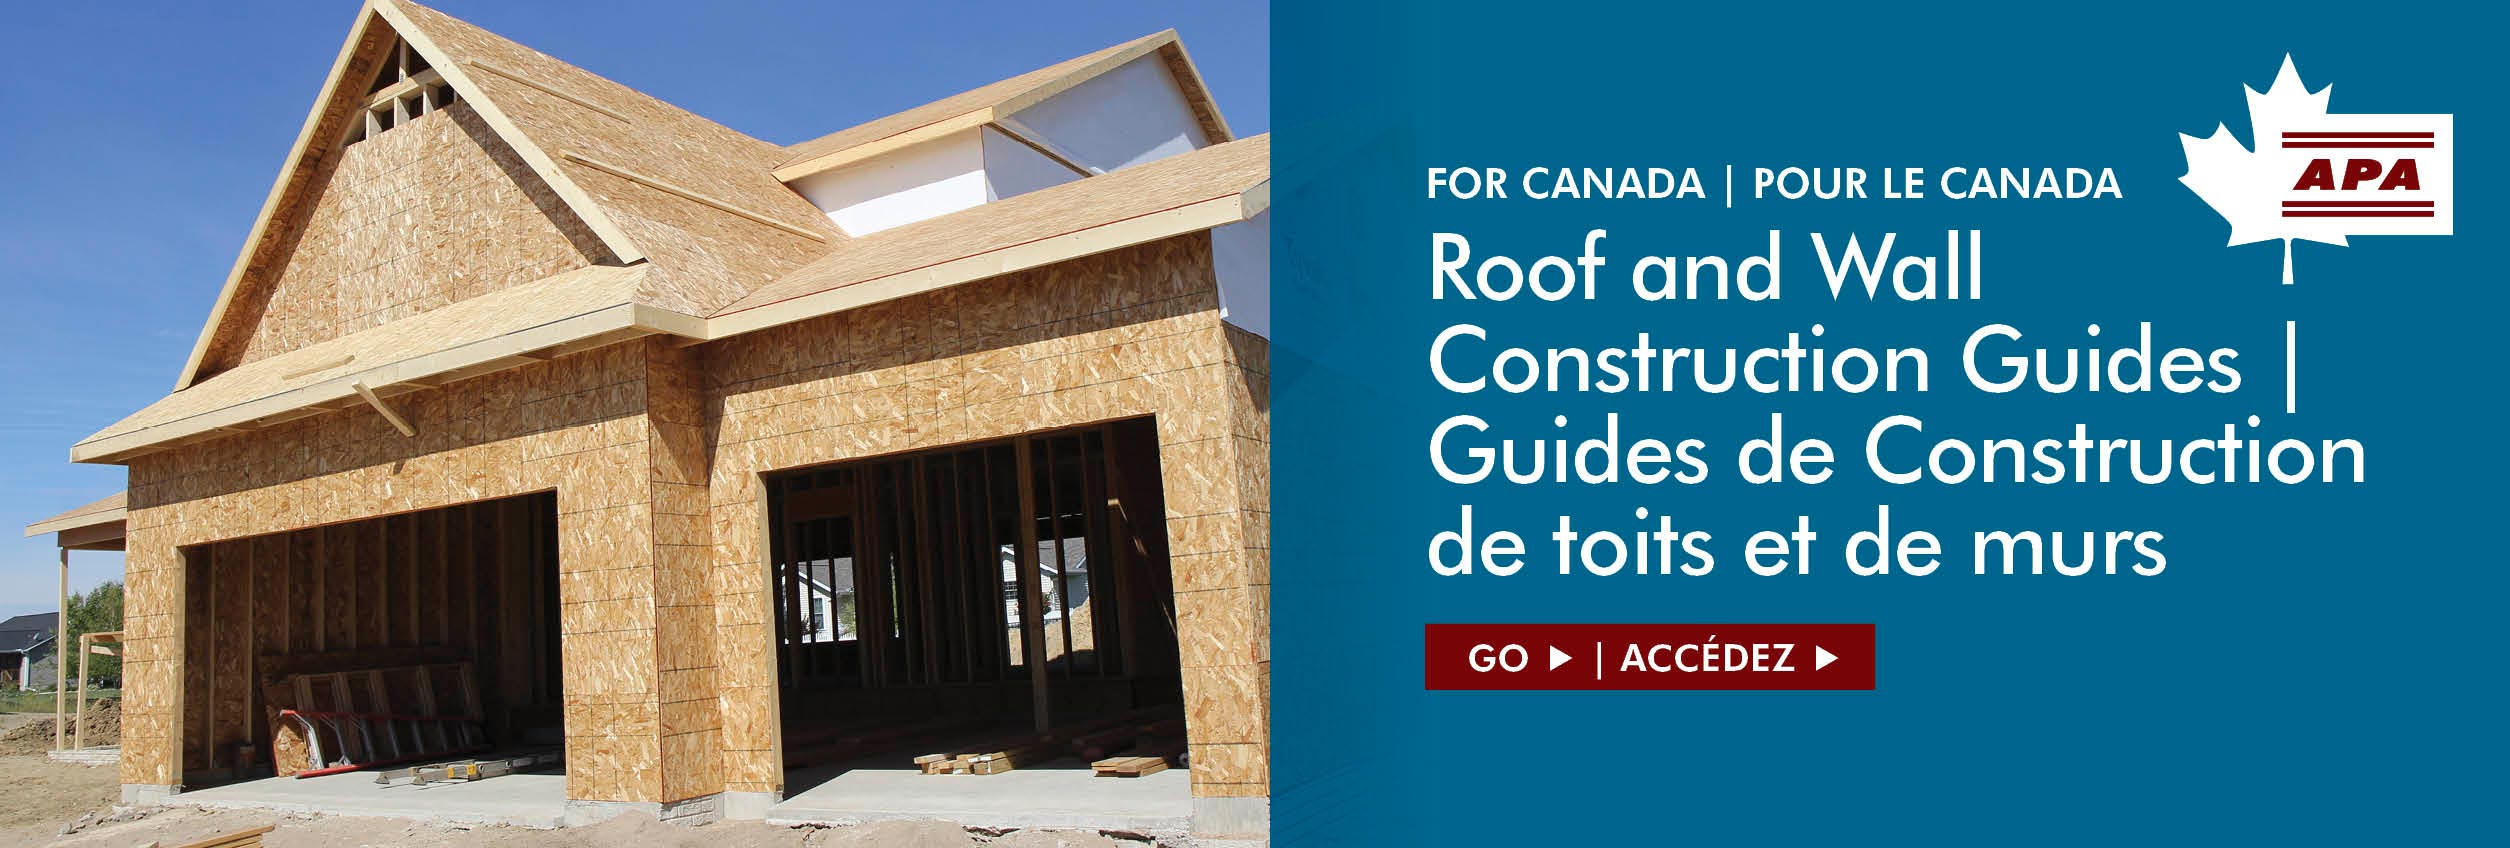 APA Roof and Wall Construction Guides for Canada